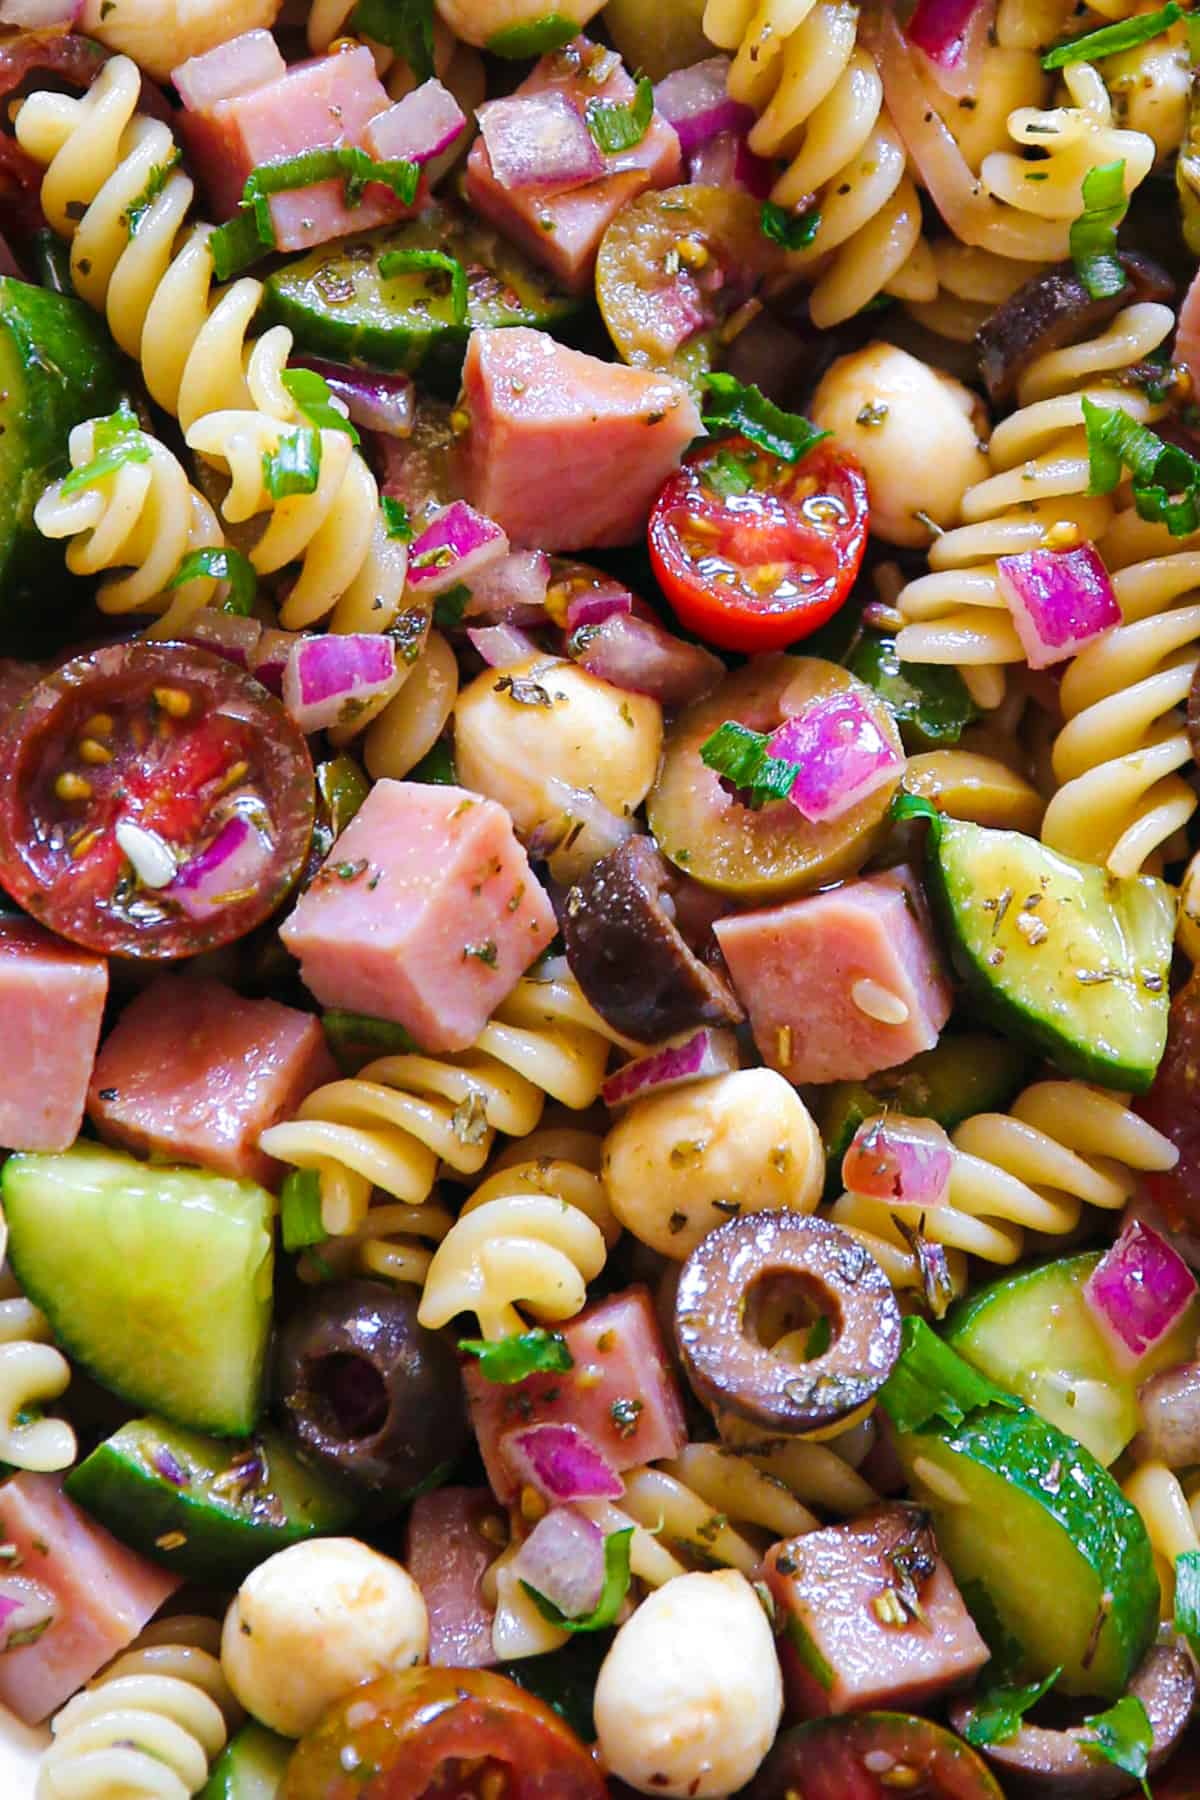 Ham Pasta Salad with Tomatoes, Cucumbers, Red Onions, Green Onions, Olives, Mozzarella Cheese - close-up photo.